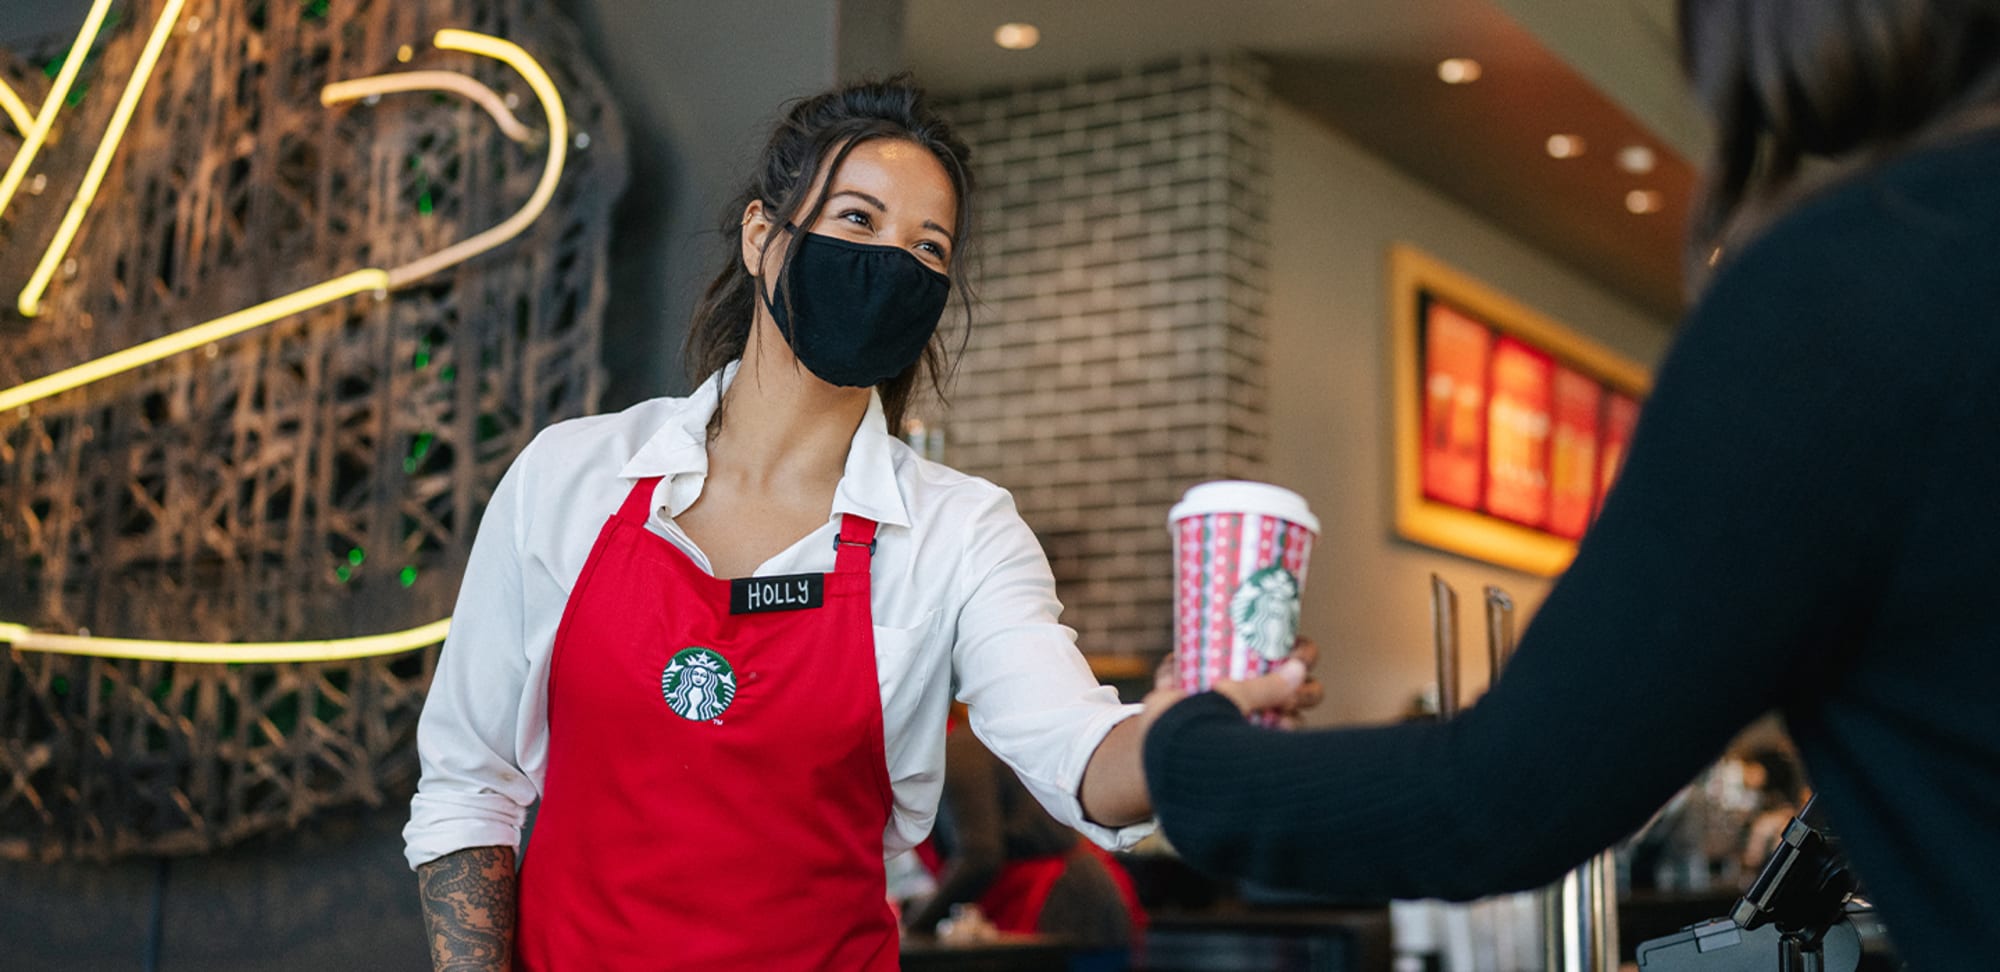 Top 10 will starbucks be open on labor day That Will Change Your Life